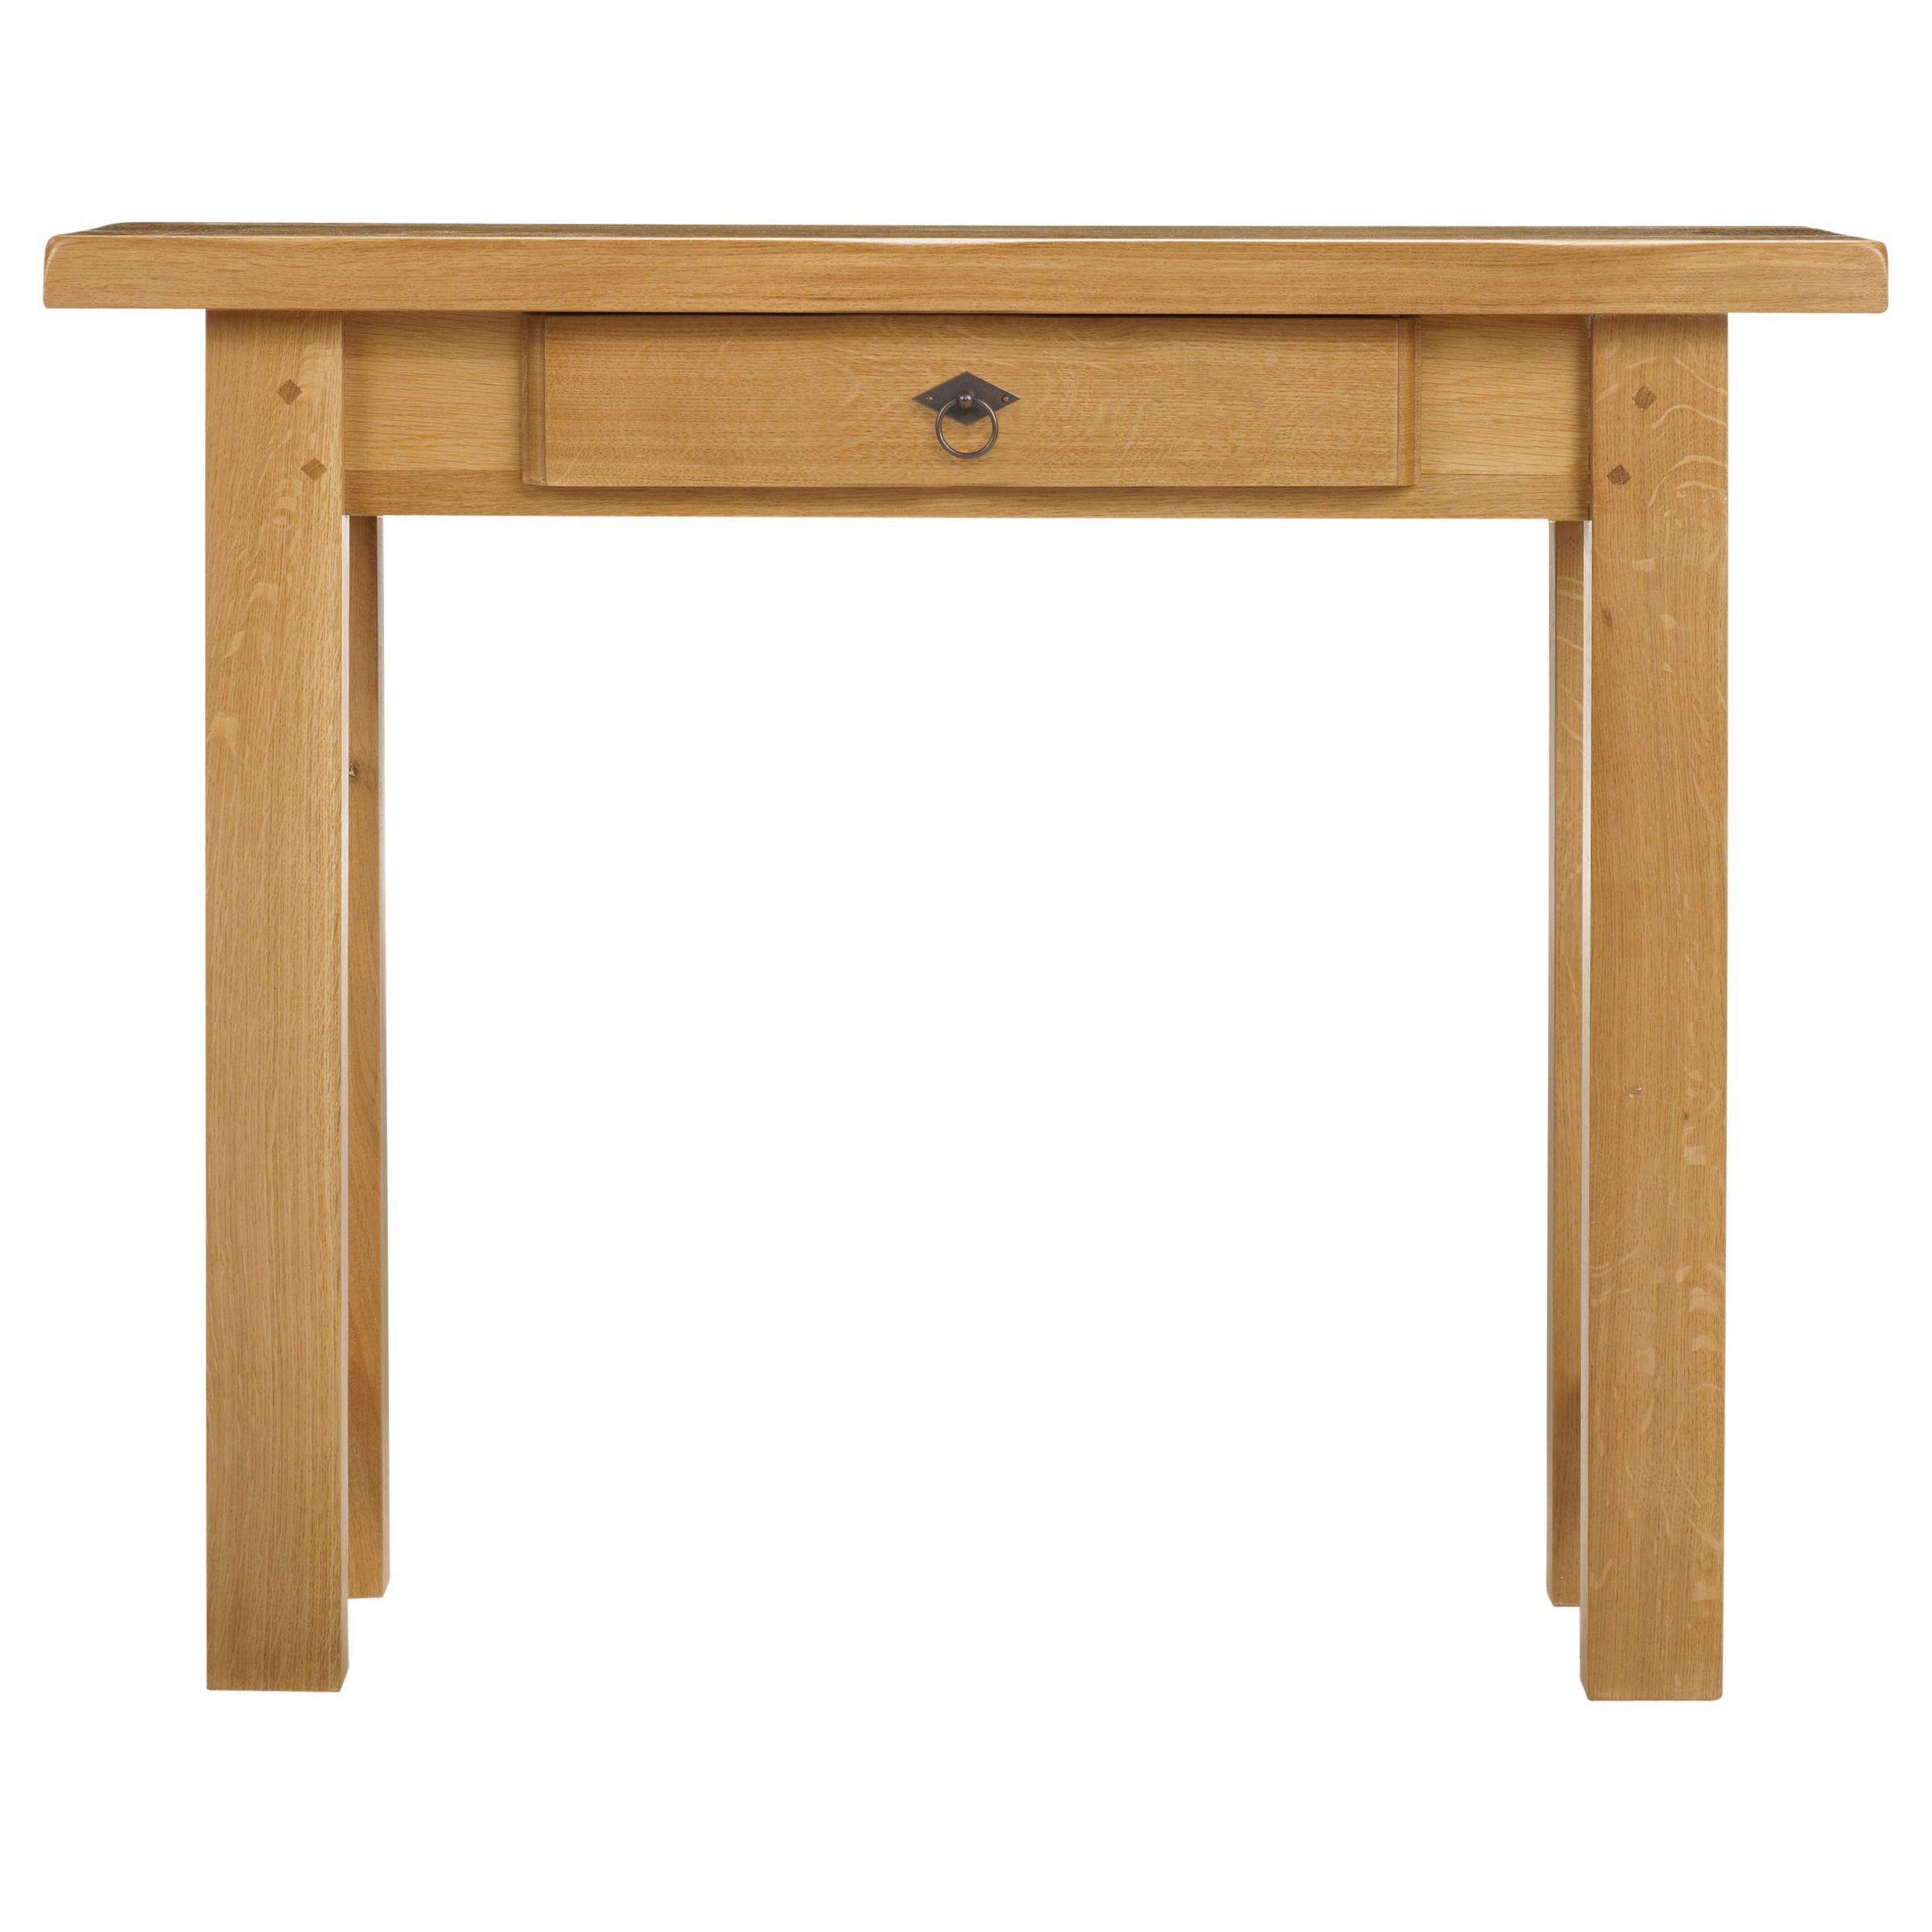 John Lewis Ardennes Console Table, Sarlat at JohnLewis